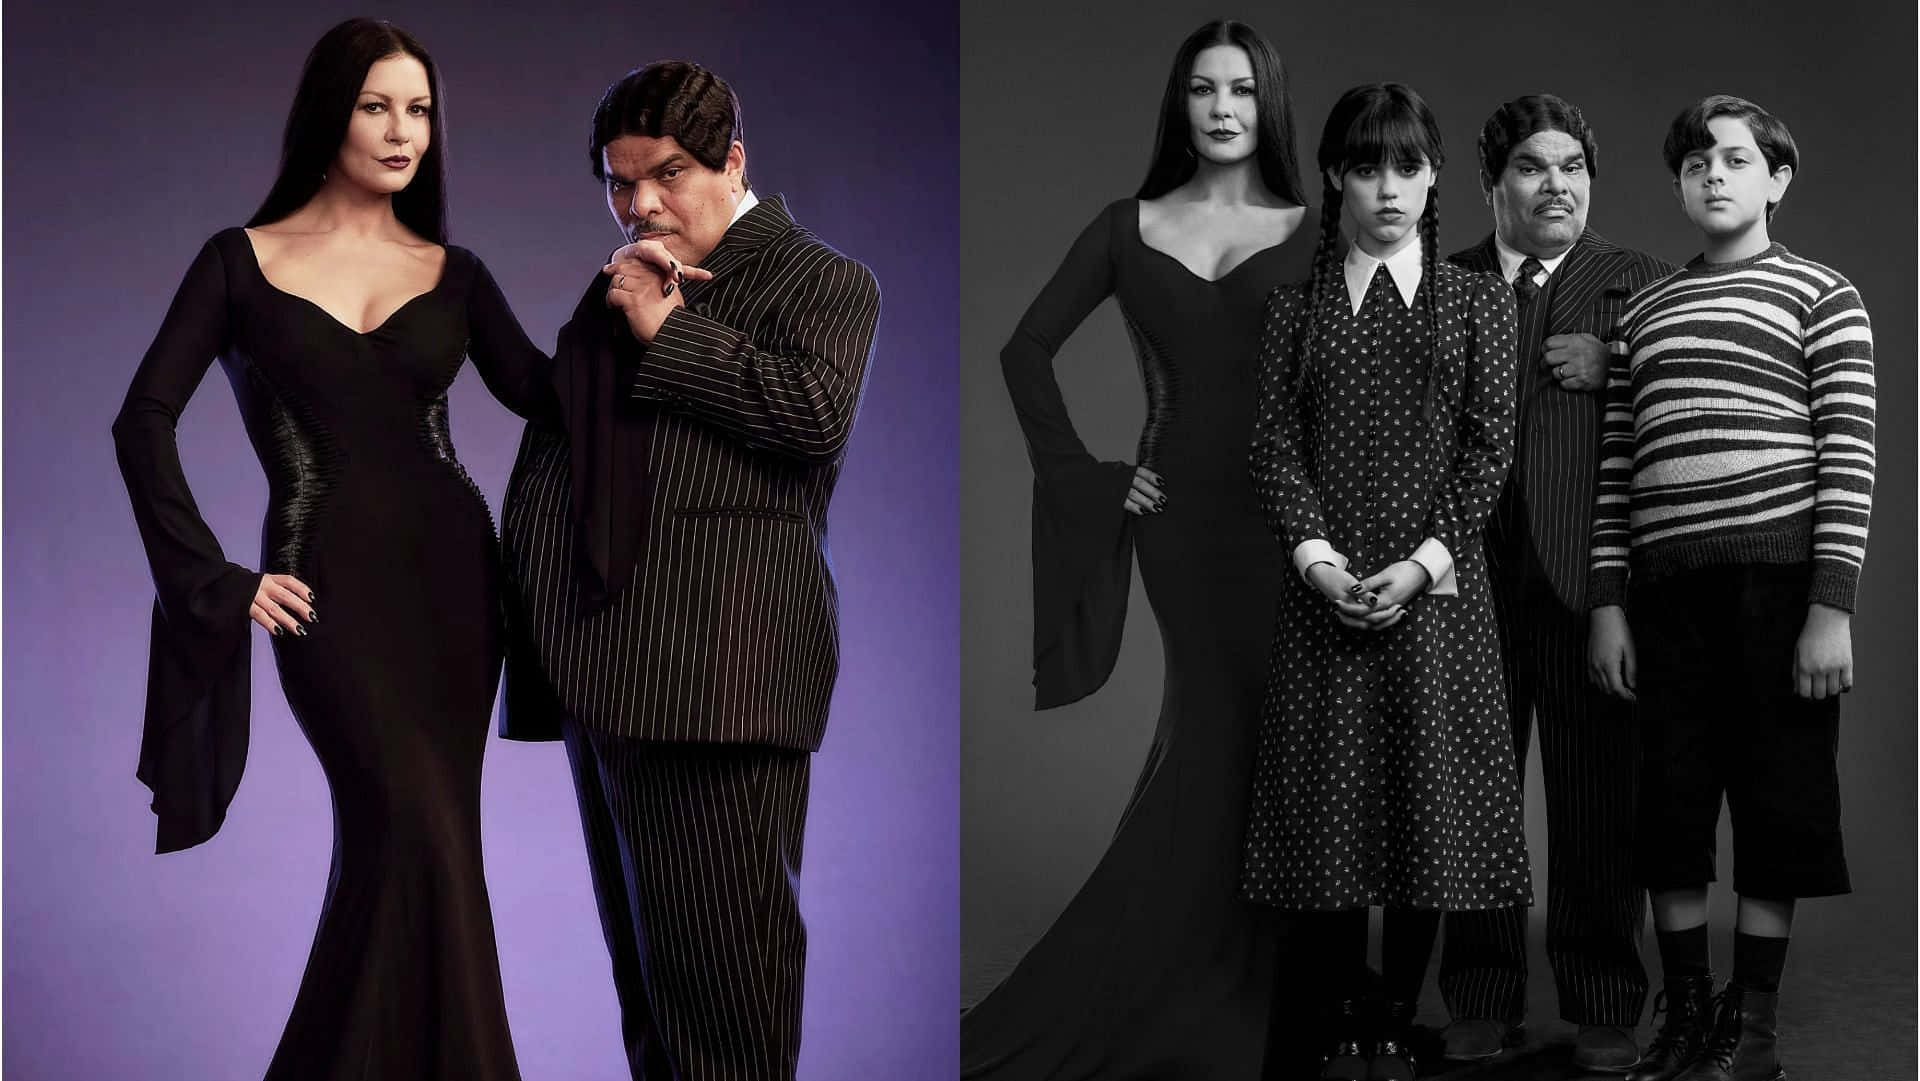 The Addams Family Pose for a Picture